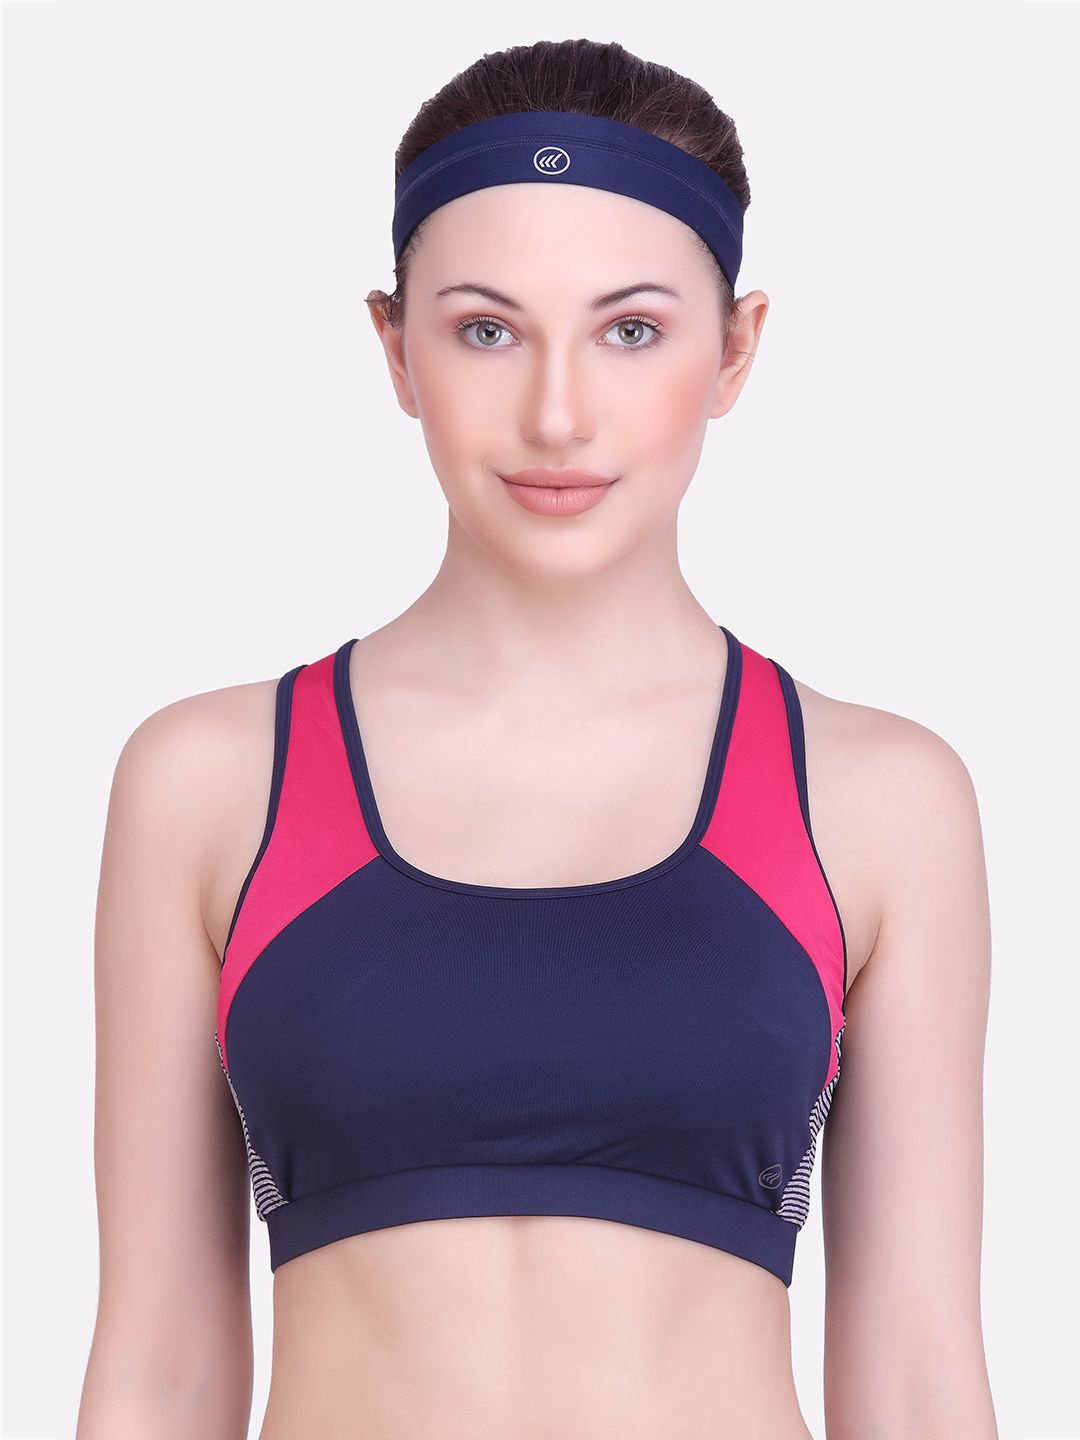 LAASA SPORTS Navy Blue & Pink Dry Fit RacerBack Workout Bra Price in India